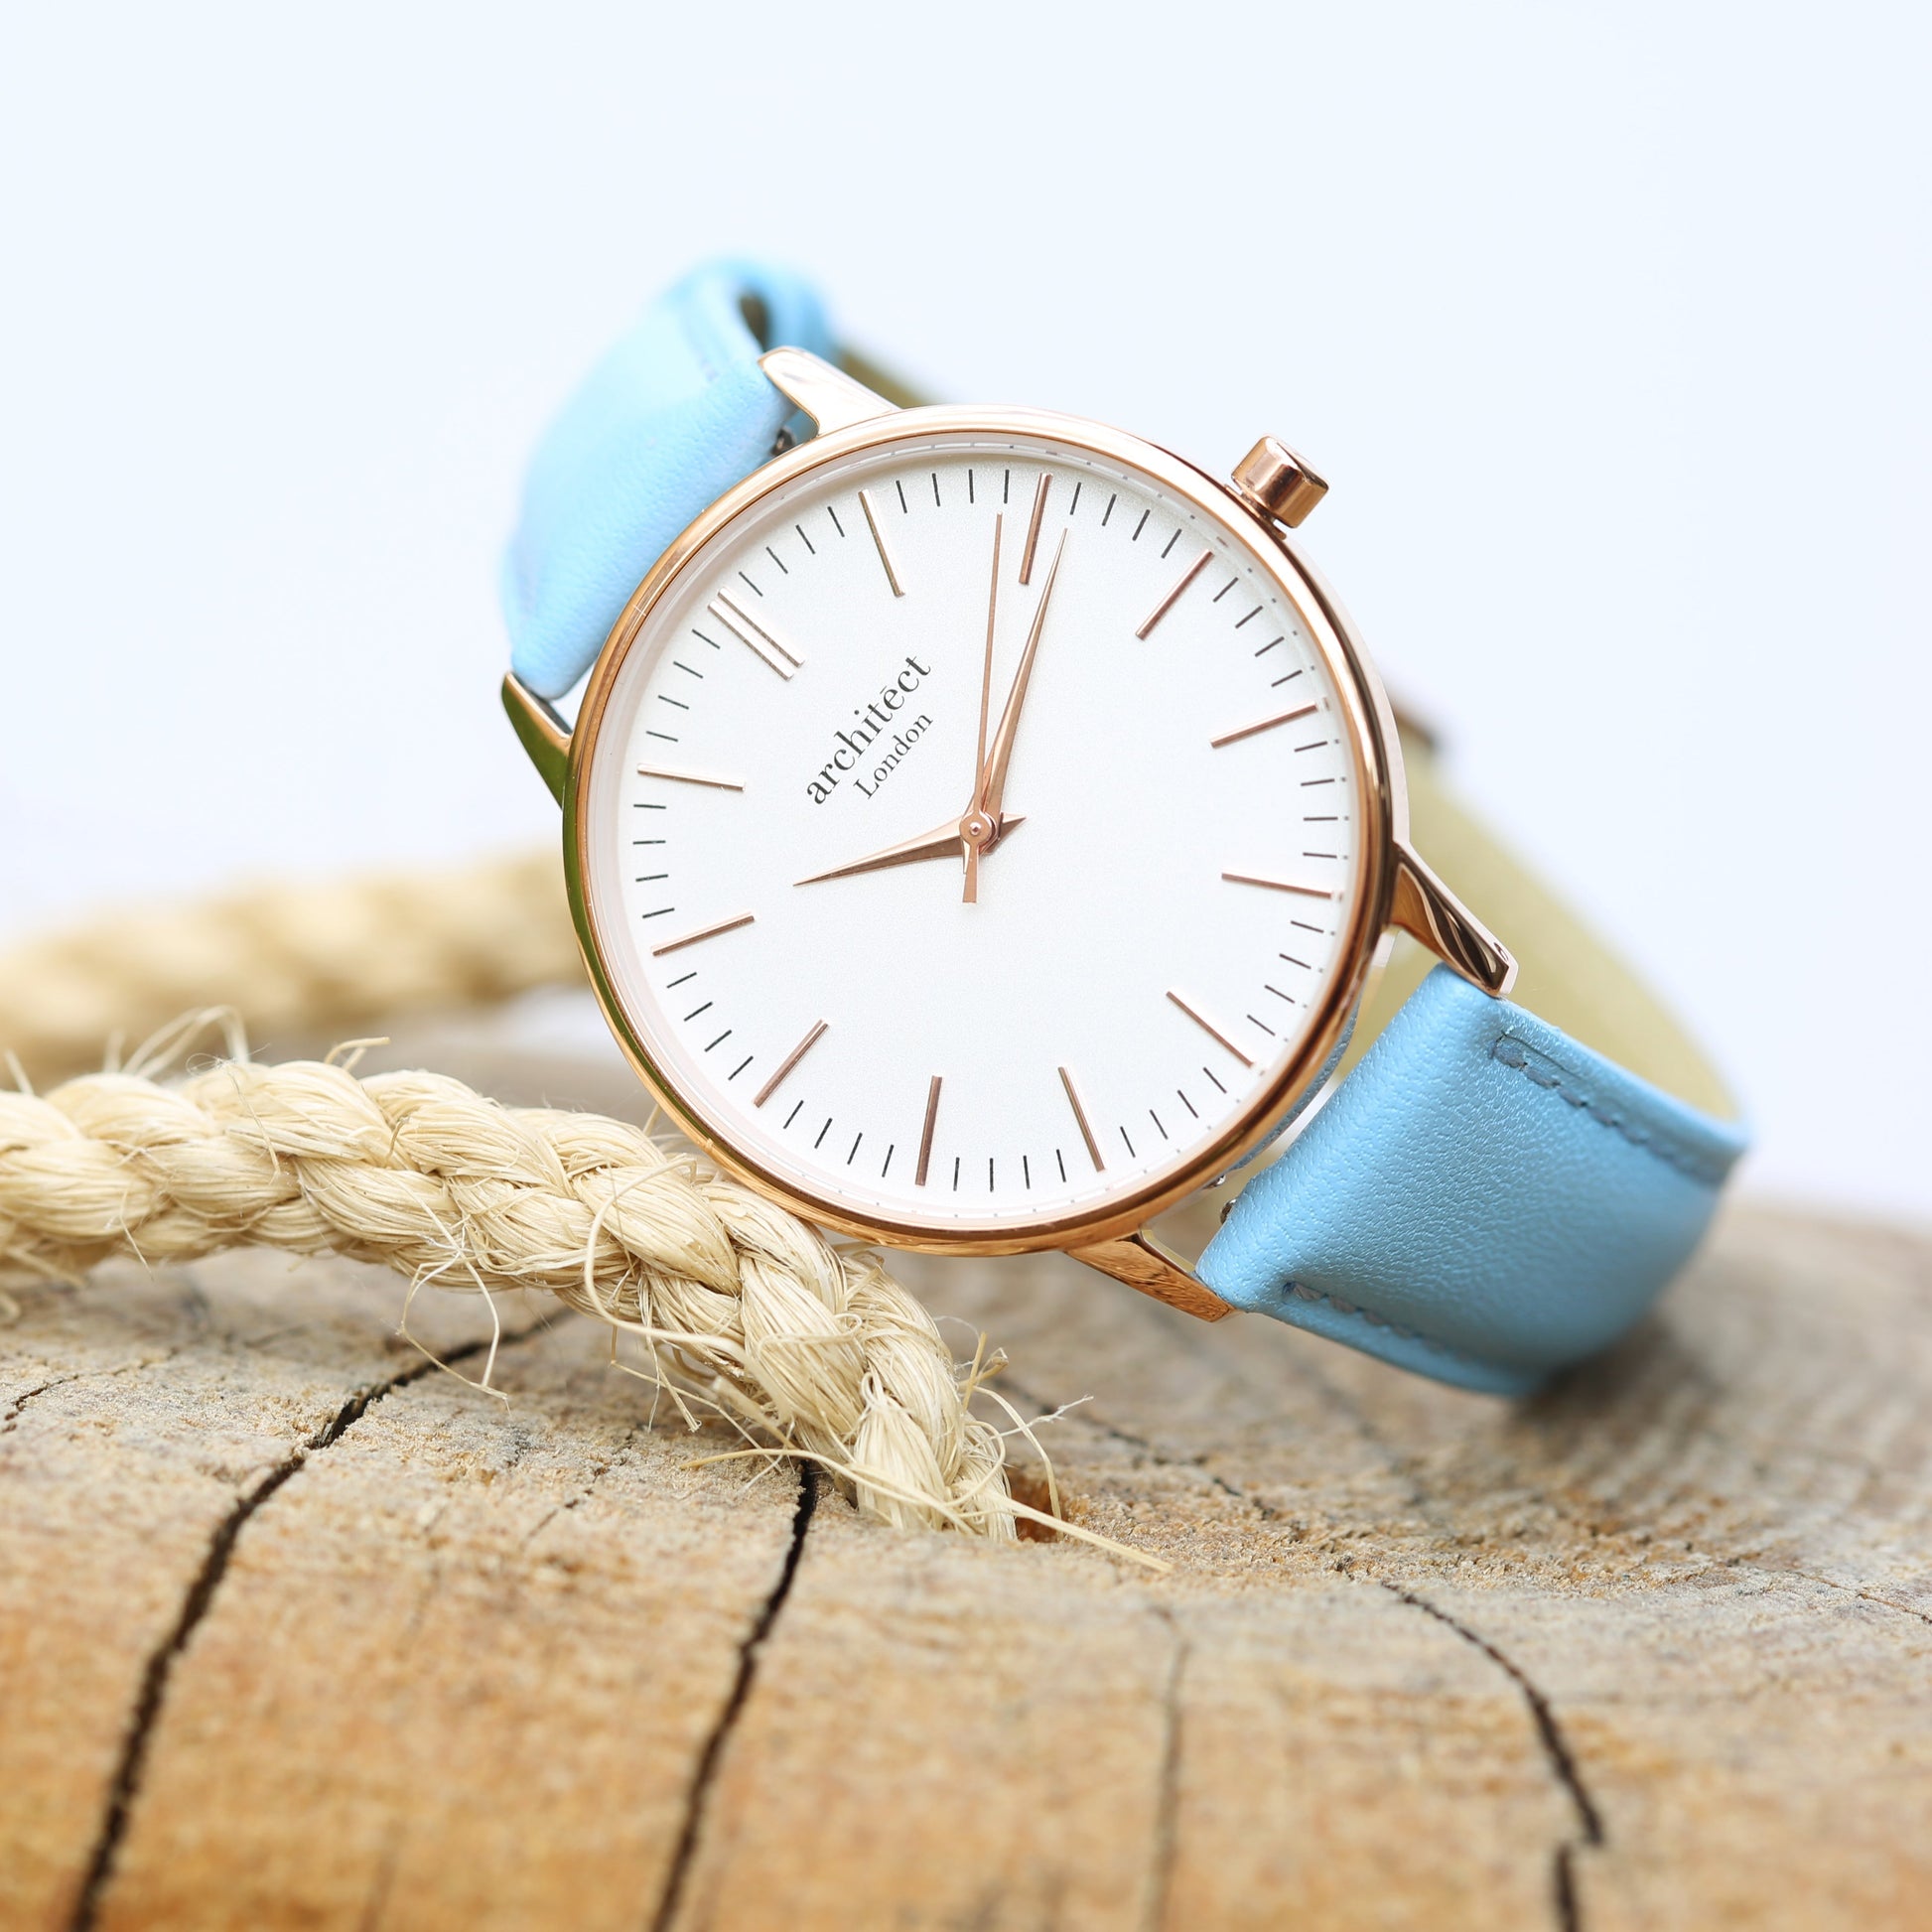 Personalized Ladies' Watches - Ladies Handwriting Engraved Watch in Light Blue 